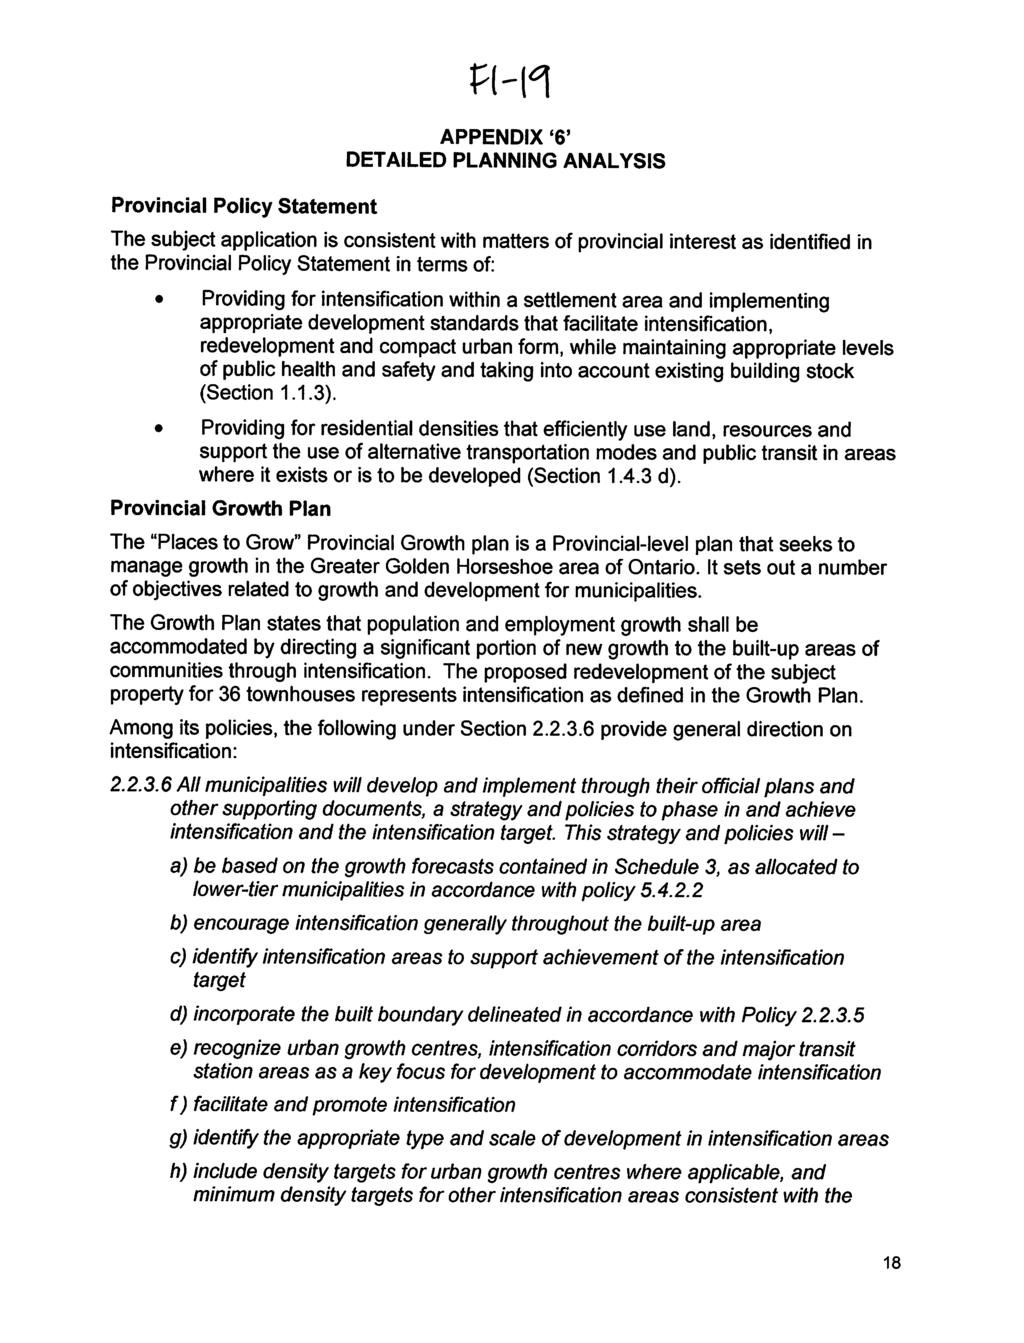 Provincial Policy Statement Fl-fl APPENDIX '6' DETAILED PLANNING ANALYSIS The subject application is consistent with matters of provincial interest as identified in the Provincial Policy Statement in